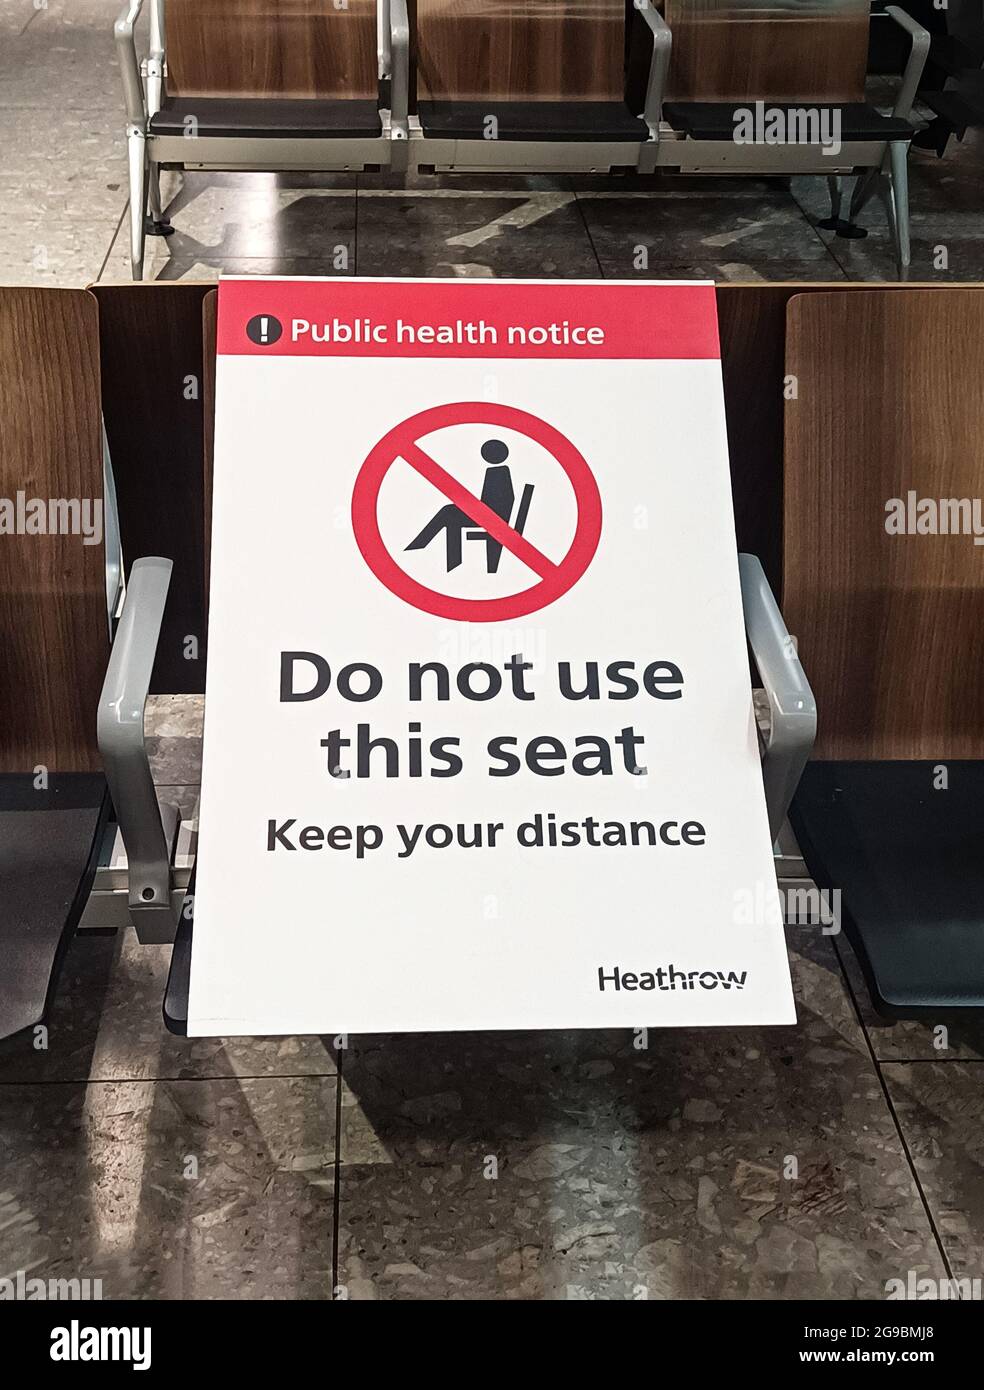 London, England, 15 March 2021. Departures at Heathrow International Airport with side signs warning passengers to keep their distance due to the COVI Stock Photo